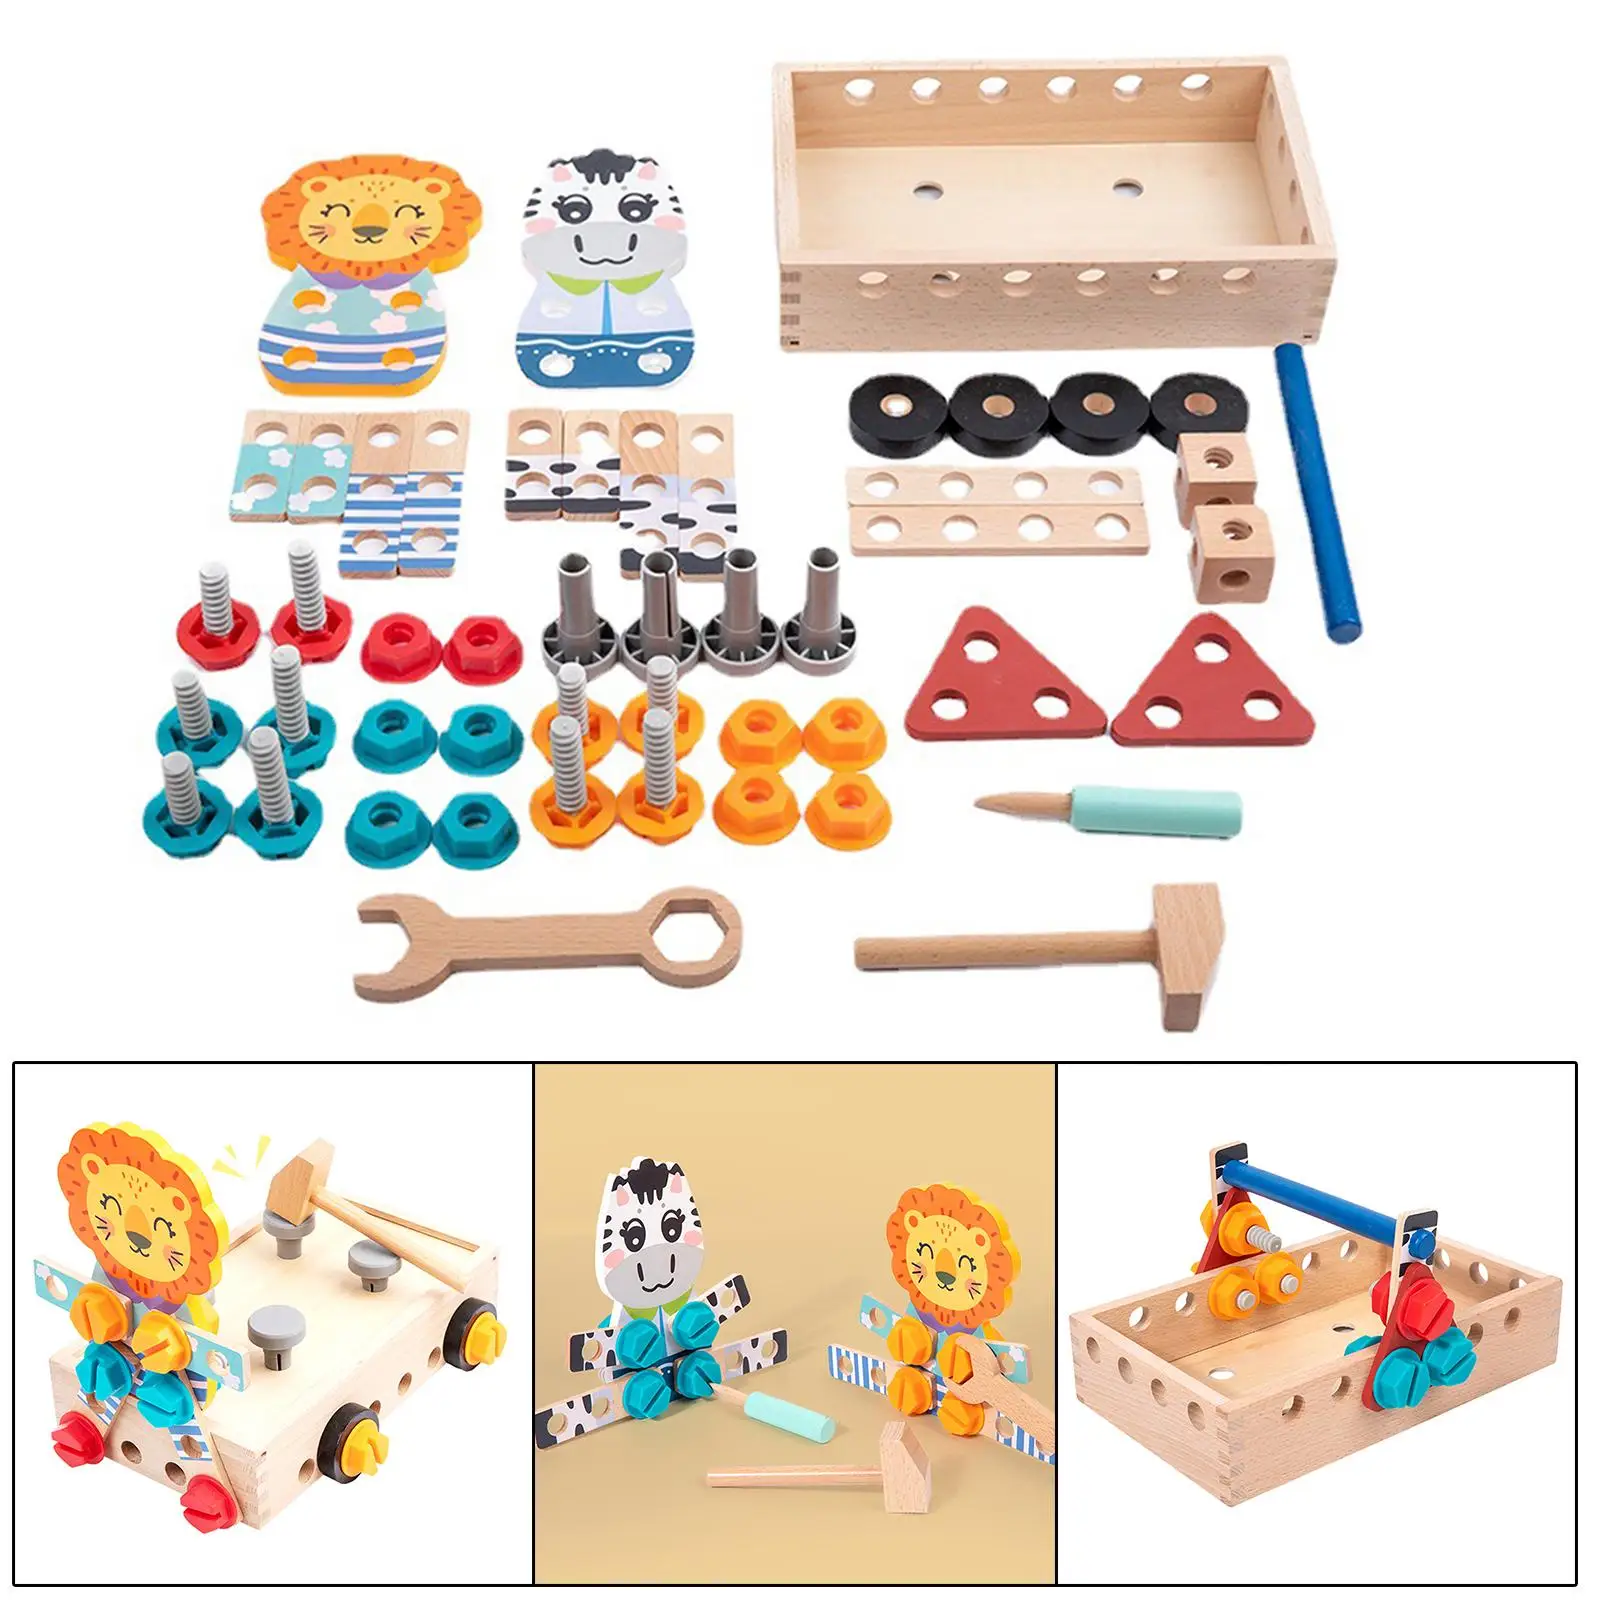 Pretend Game Toolbox Portable Montessori Creative Fine Motor Skills Toddler Tool Set for Activities Education Education Learning